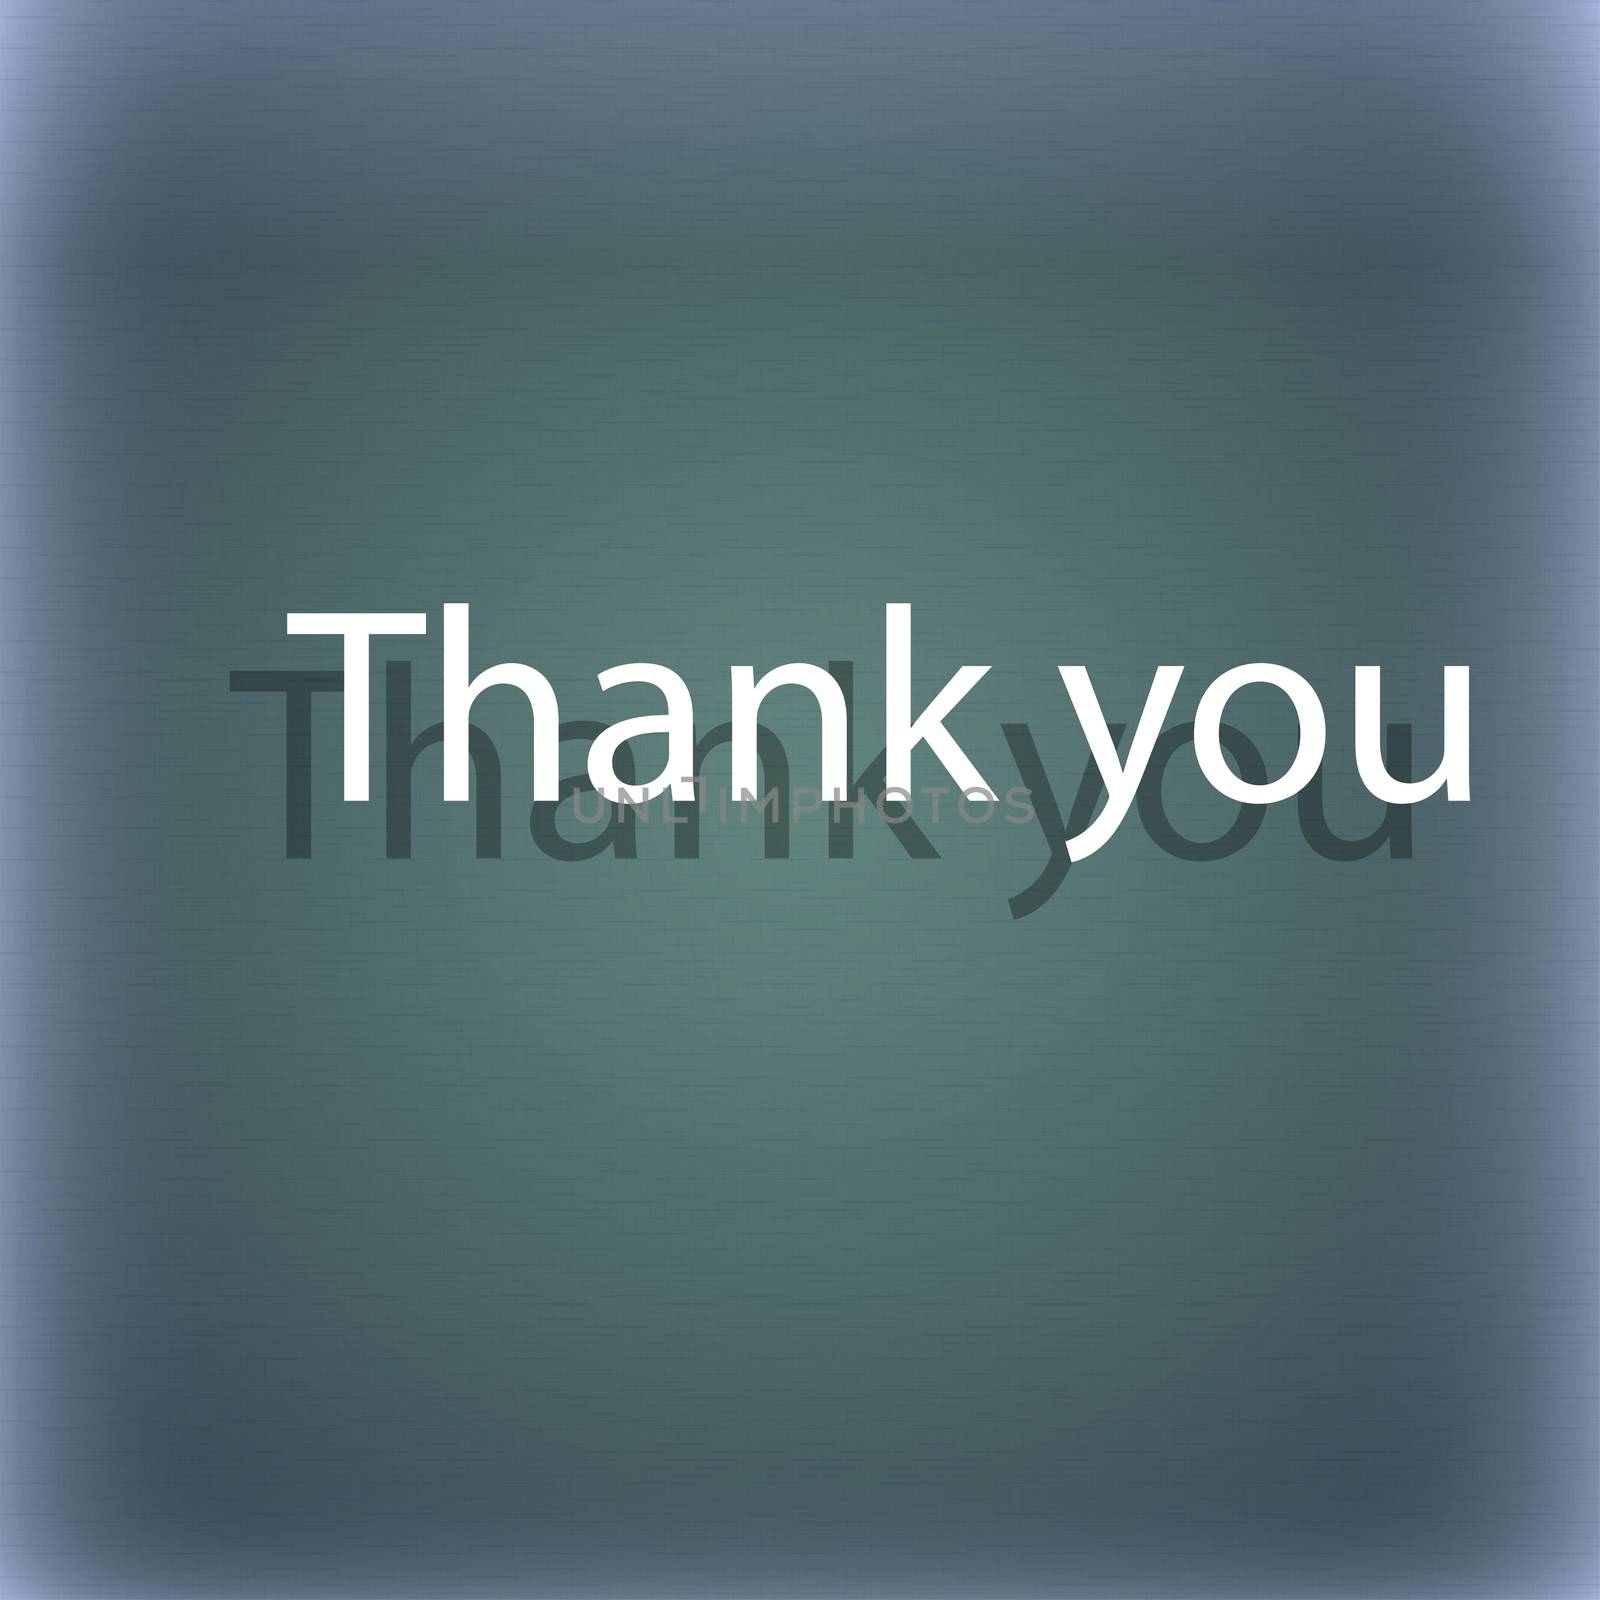 Thank you sign icon. Gratitude symbol. On the blue-green abstract background with shadow and space for your text. illustration